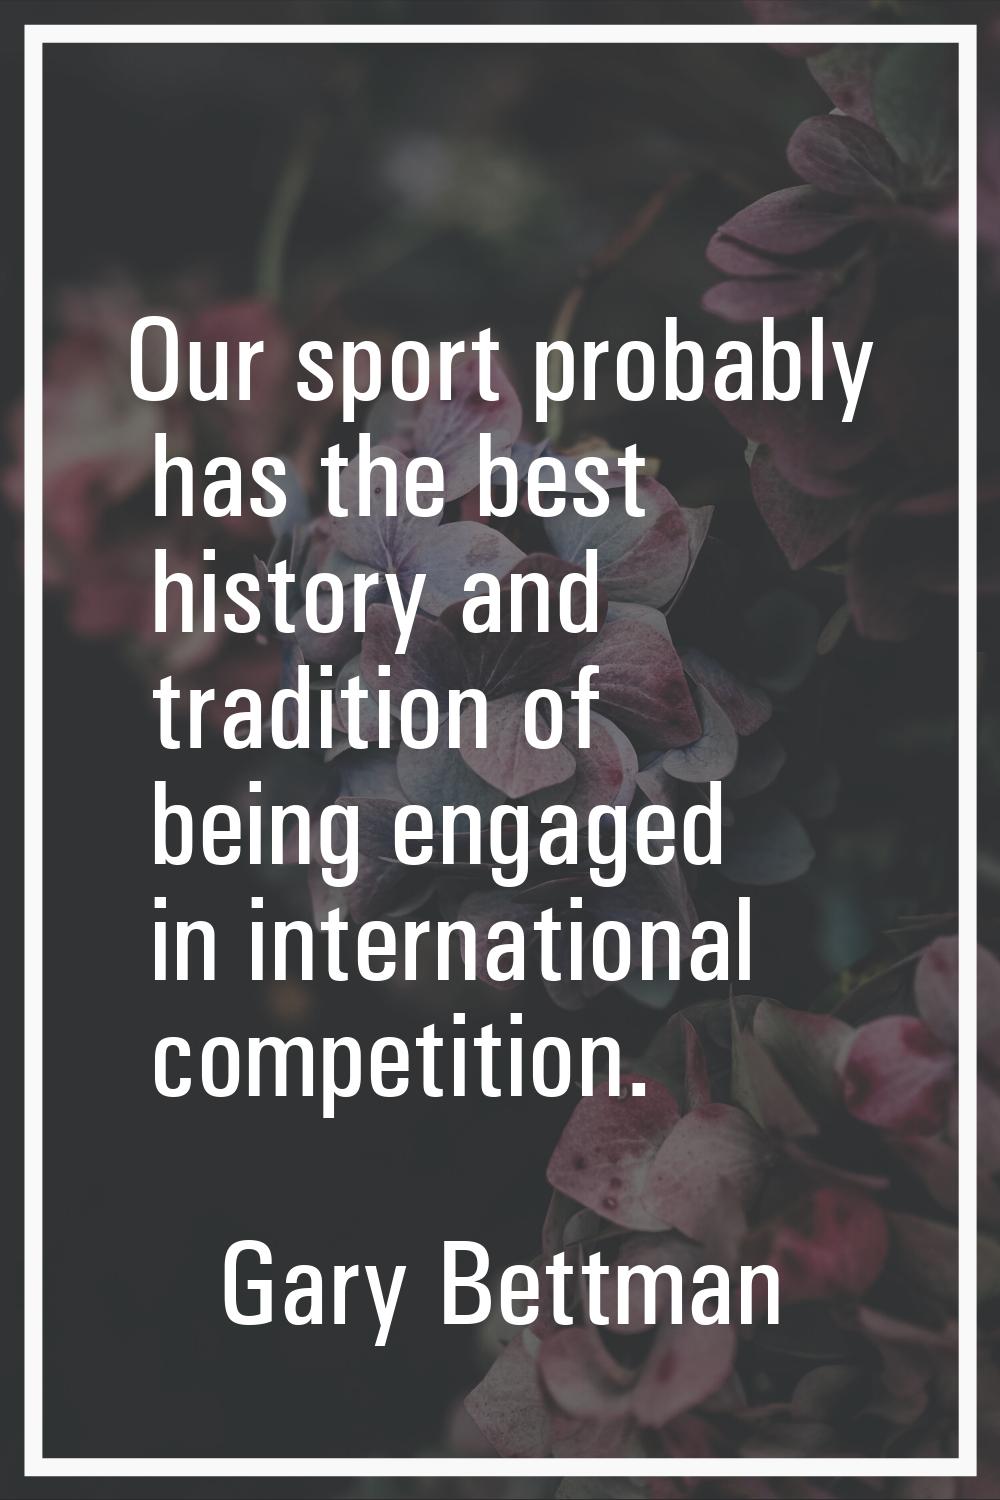 Our sport probably has the best history and tradition of being engaged in international competition